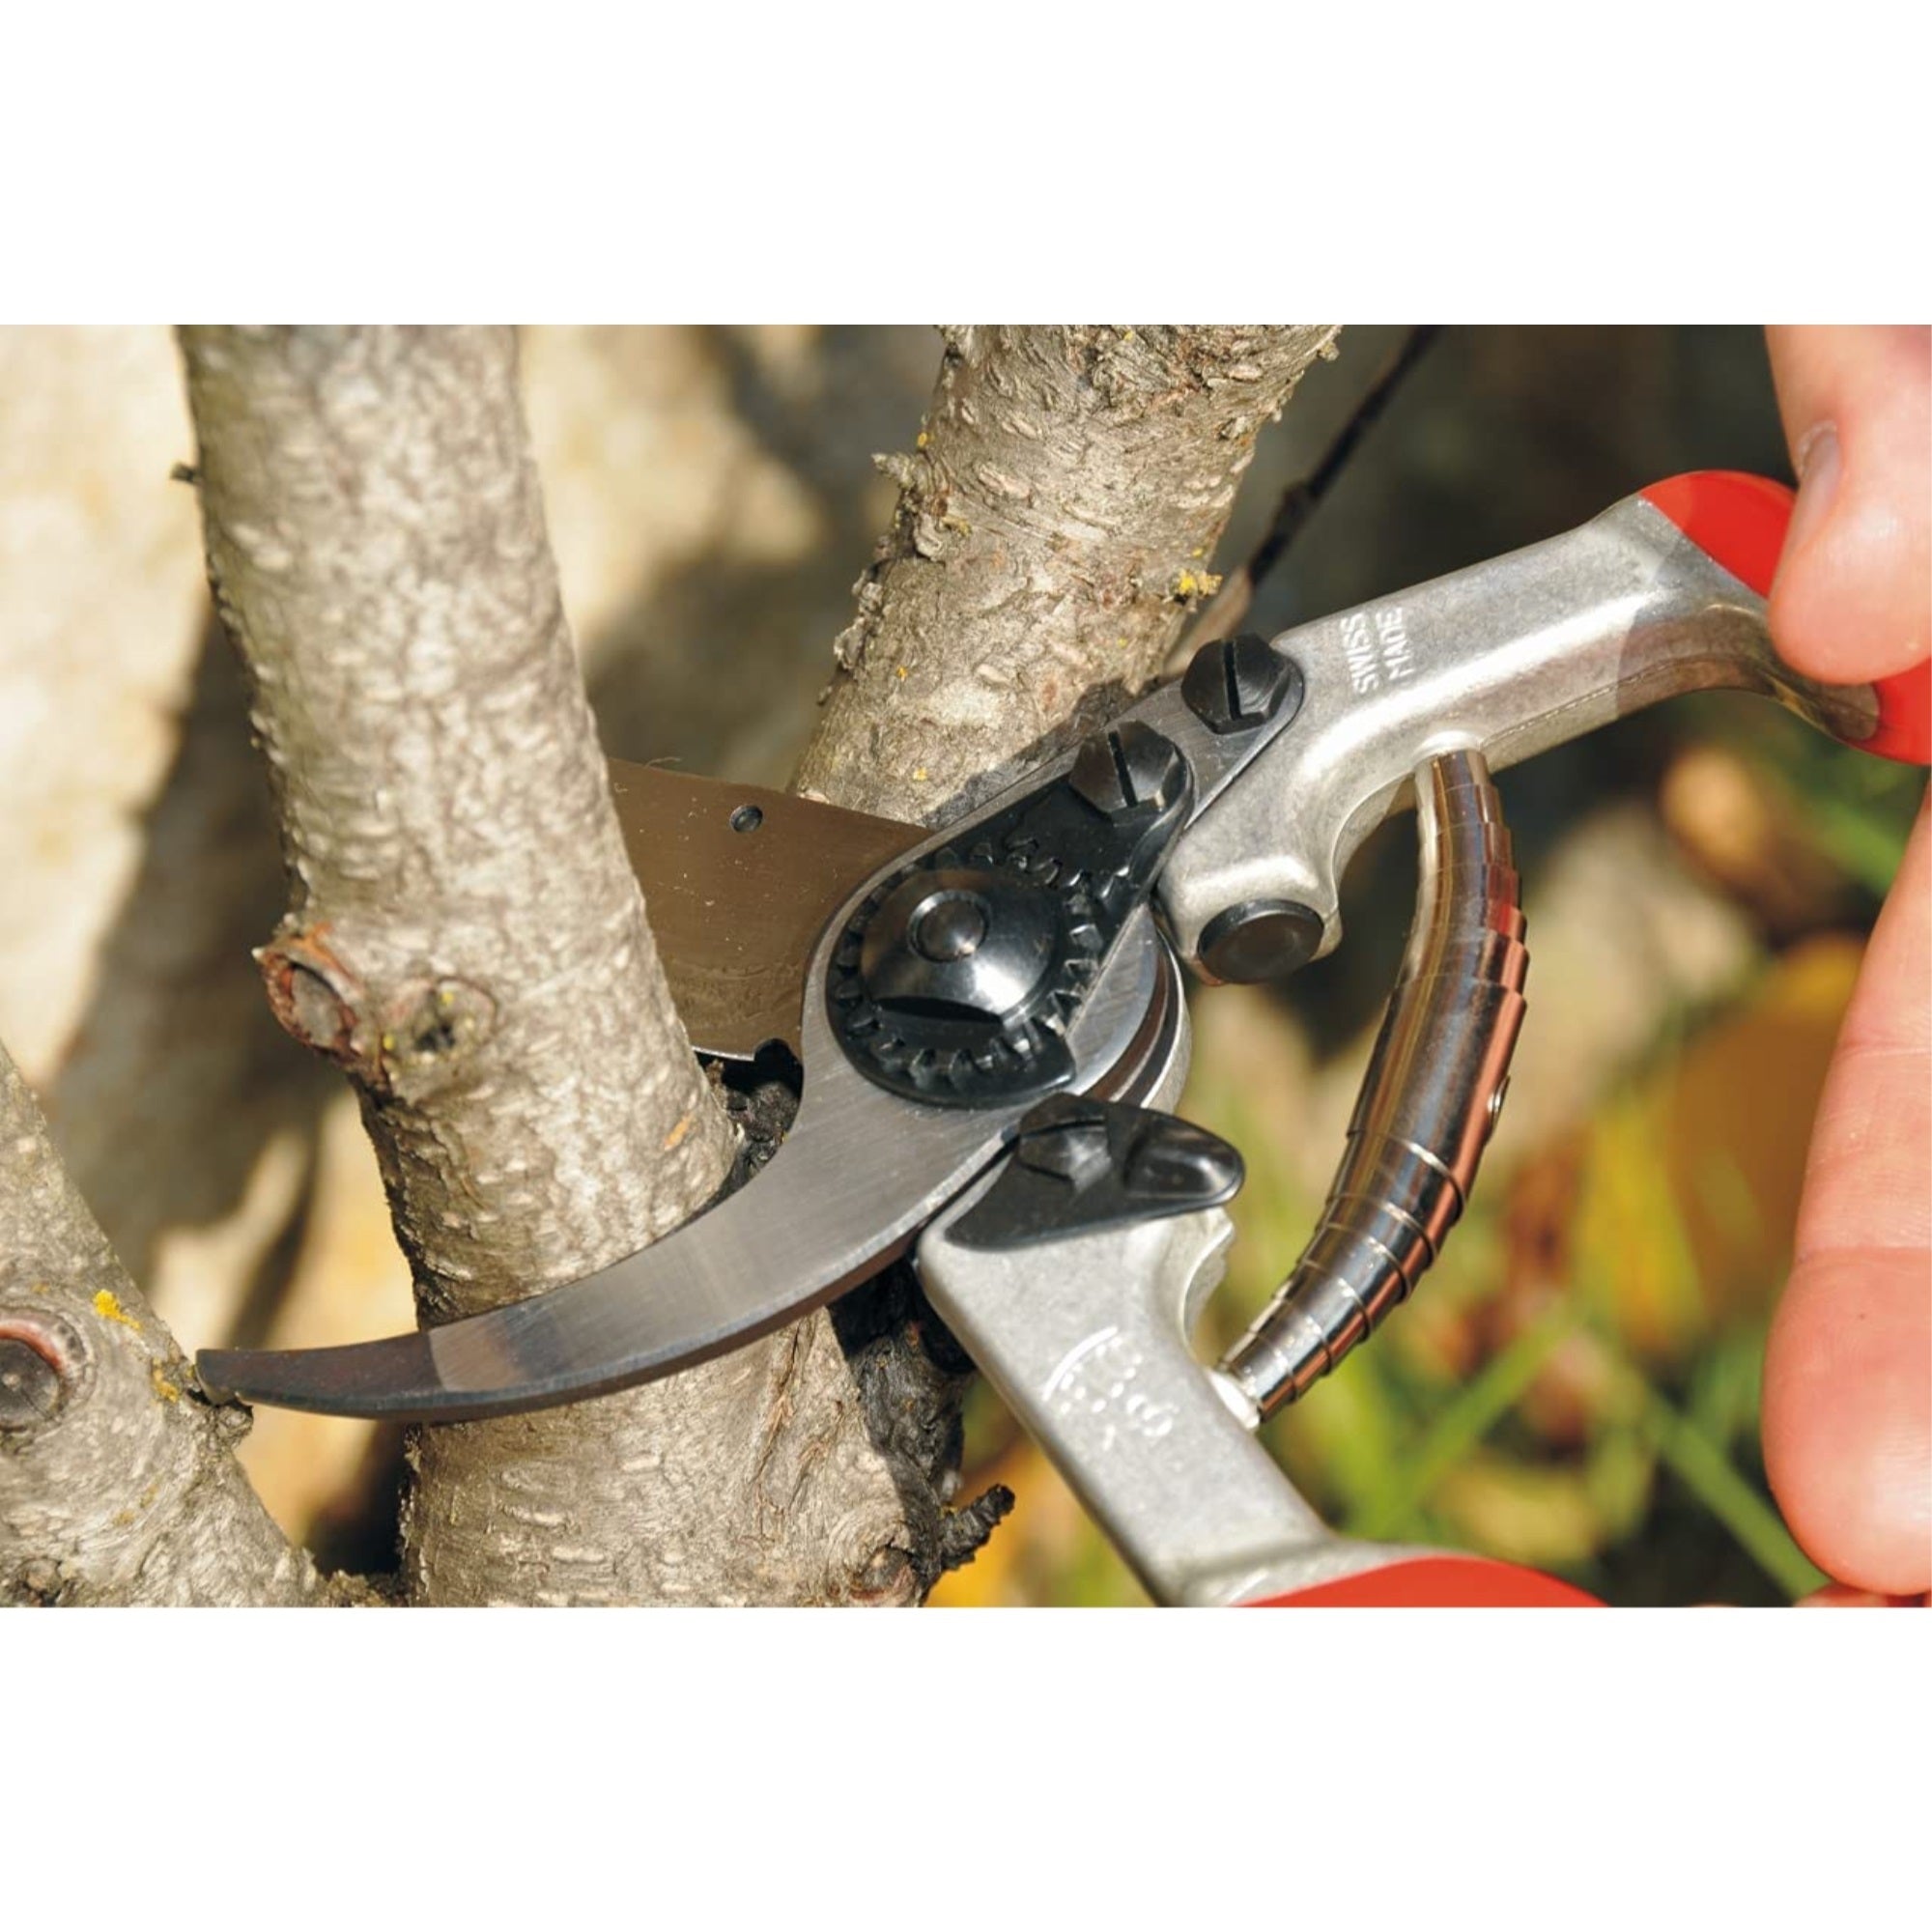 Felco F13 One or Two-Hand Garden Pruner with Steel Blade